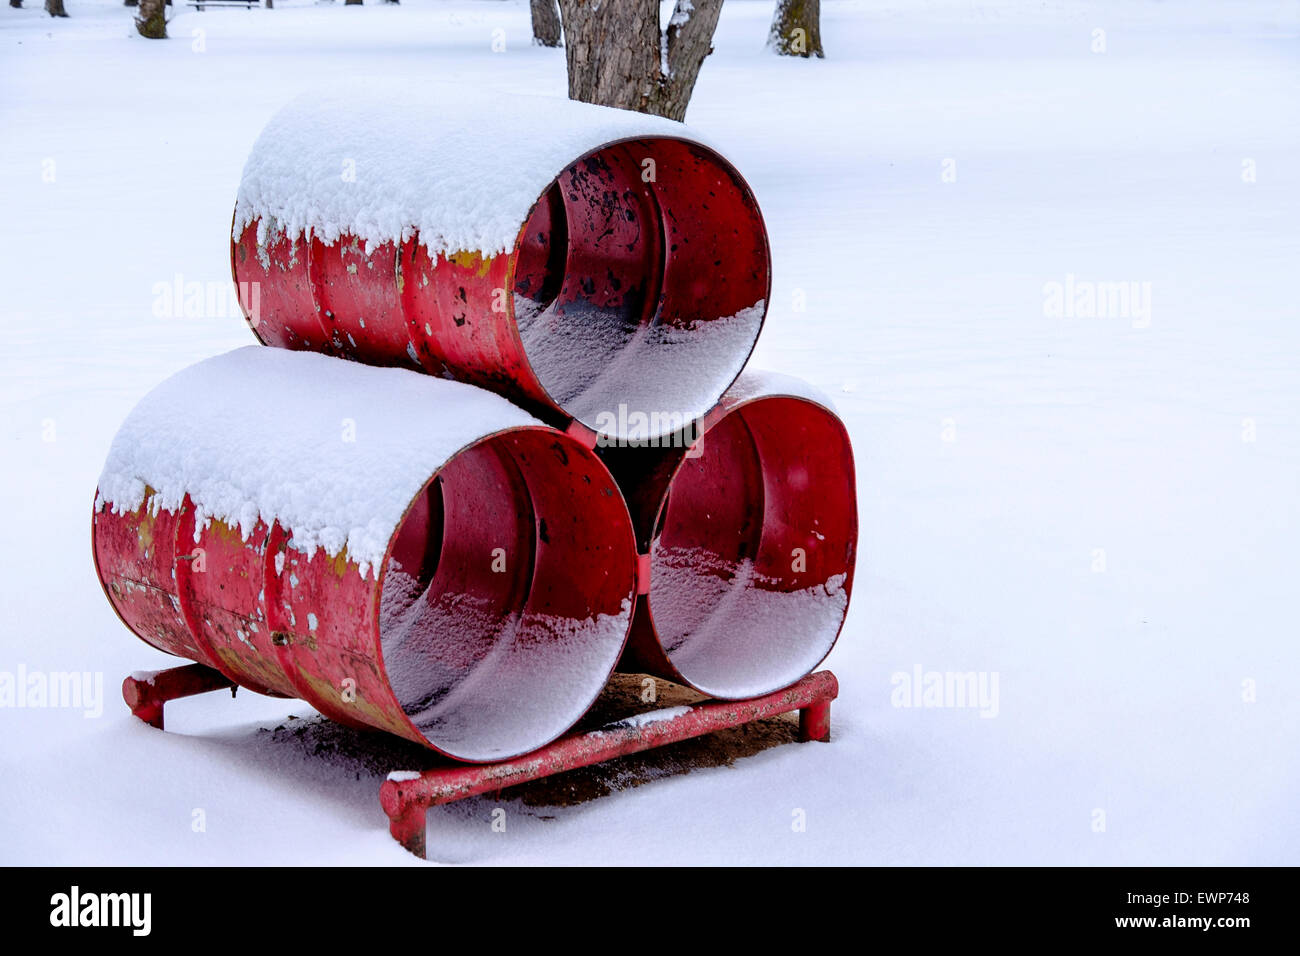 Three red barrels welded together for climbing in a park playground. Winter, snow. Stock Photo